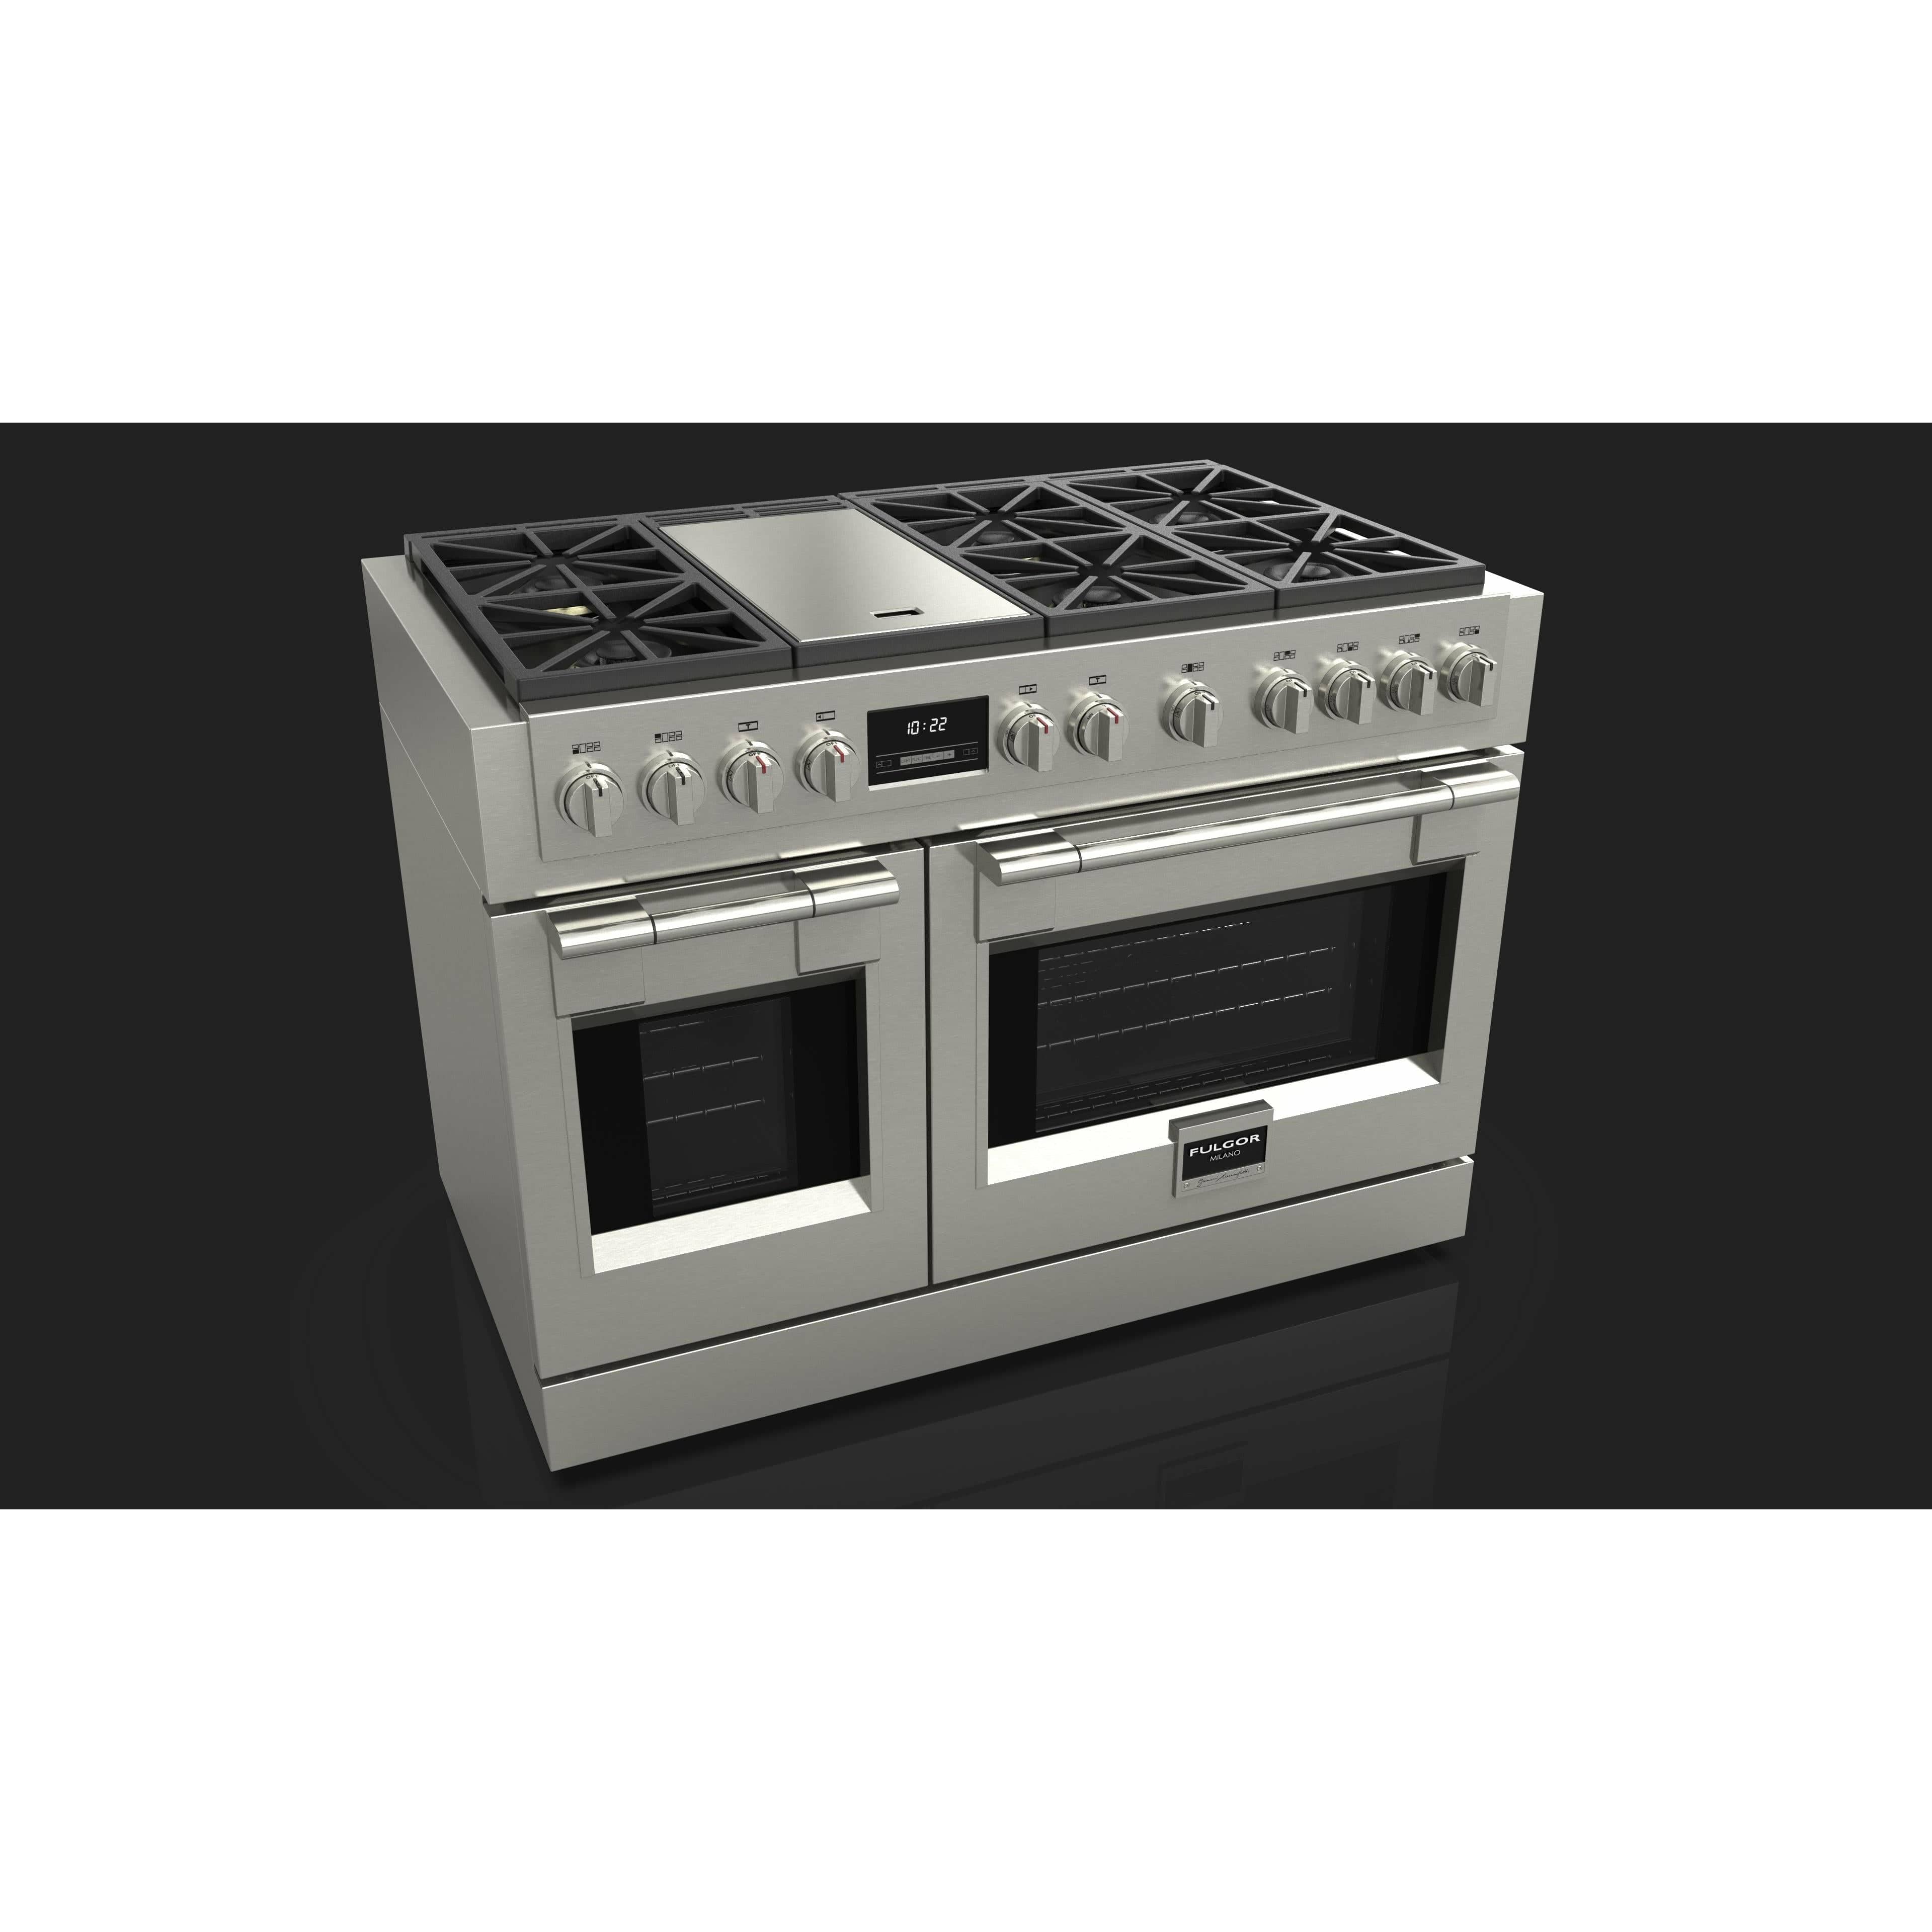 Fulgor Milano 48" Freestanding Professional All Gas Range with 6 Dual Flame Sealed Burners, Stainless Steel - F6PGR486GS2 Ranges F6PGR486GS2 Luxury Appliances Direct